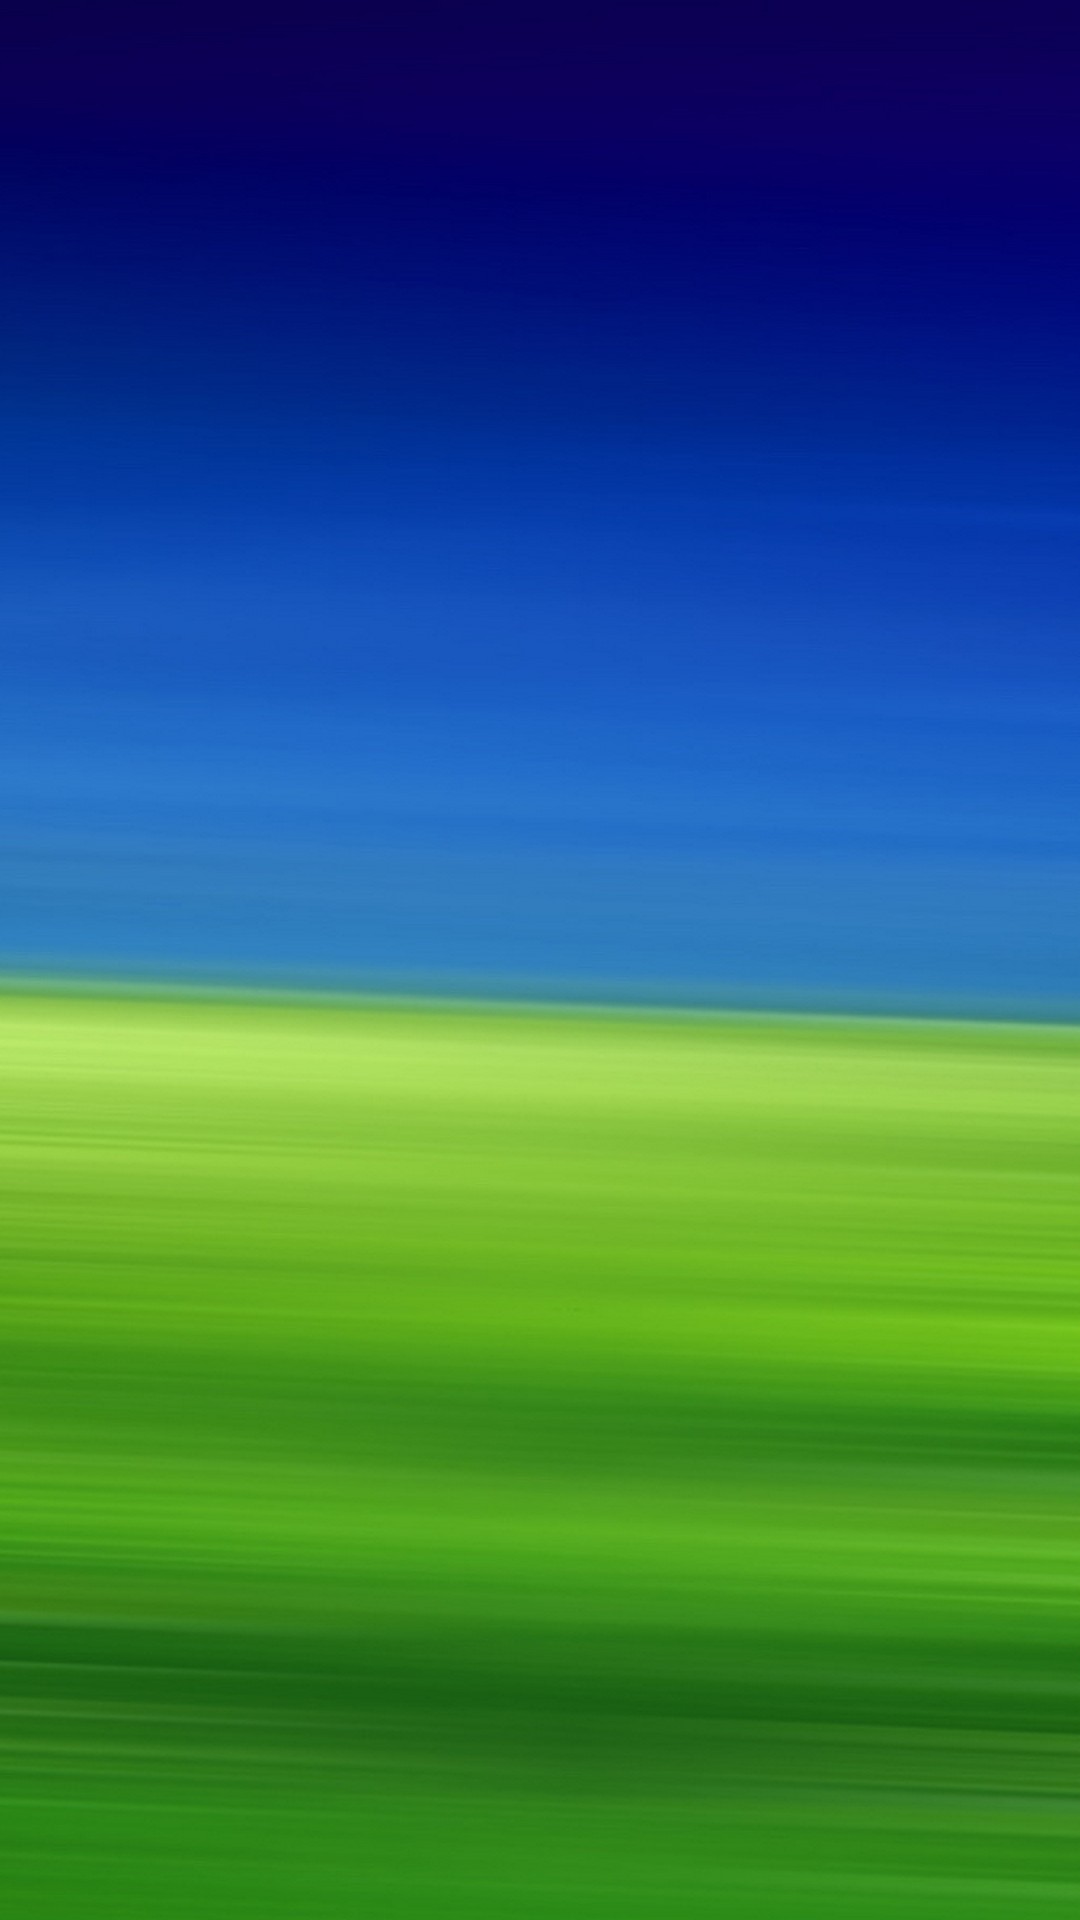 Blue and Green HD Wallpapers For Android with image resolution 1080x1920 pixel. You can make this wallpaper for your Android backgrounds, Tablet, Smartphones Screensavers and Mobile Phone Lock Screen